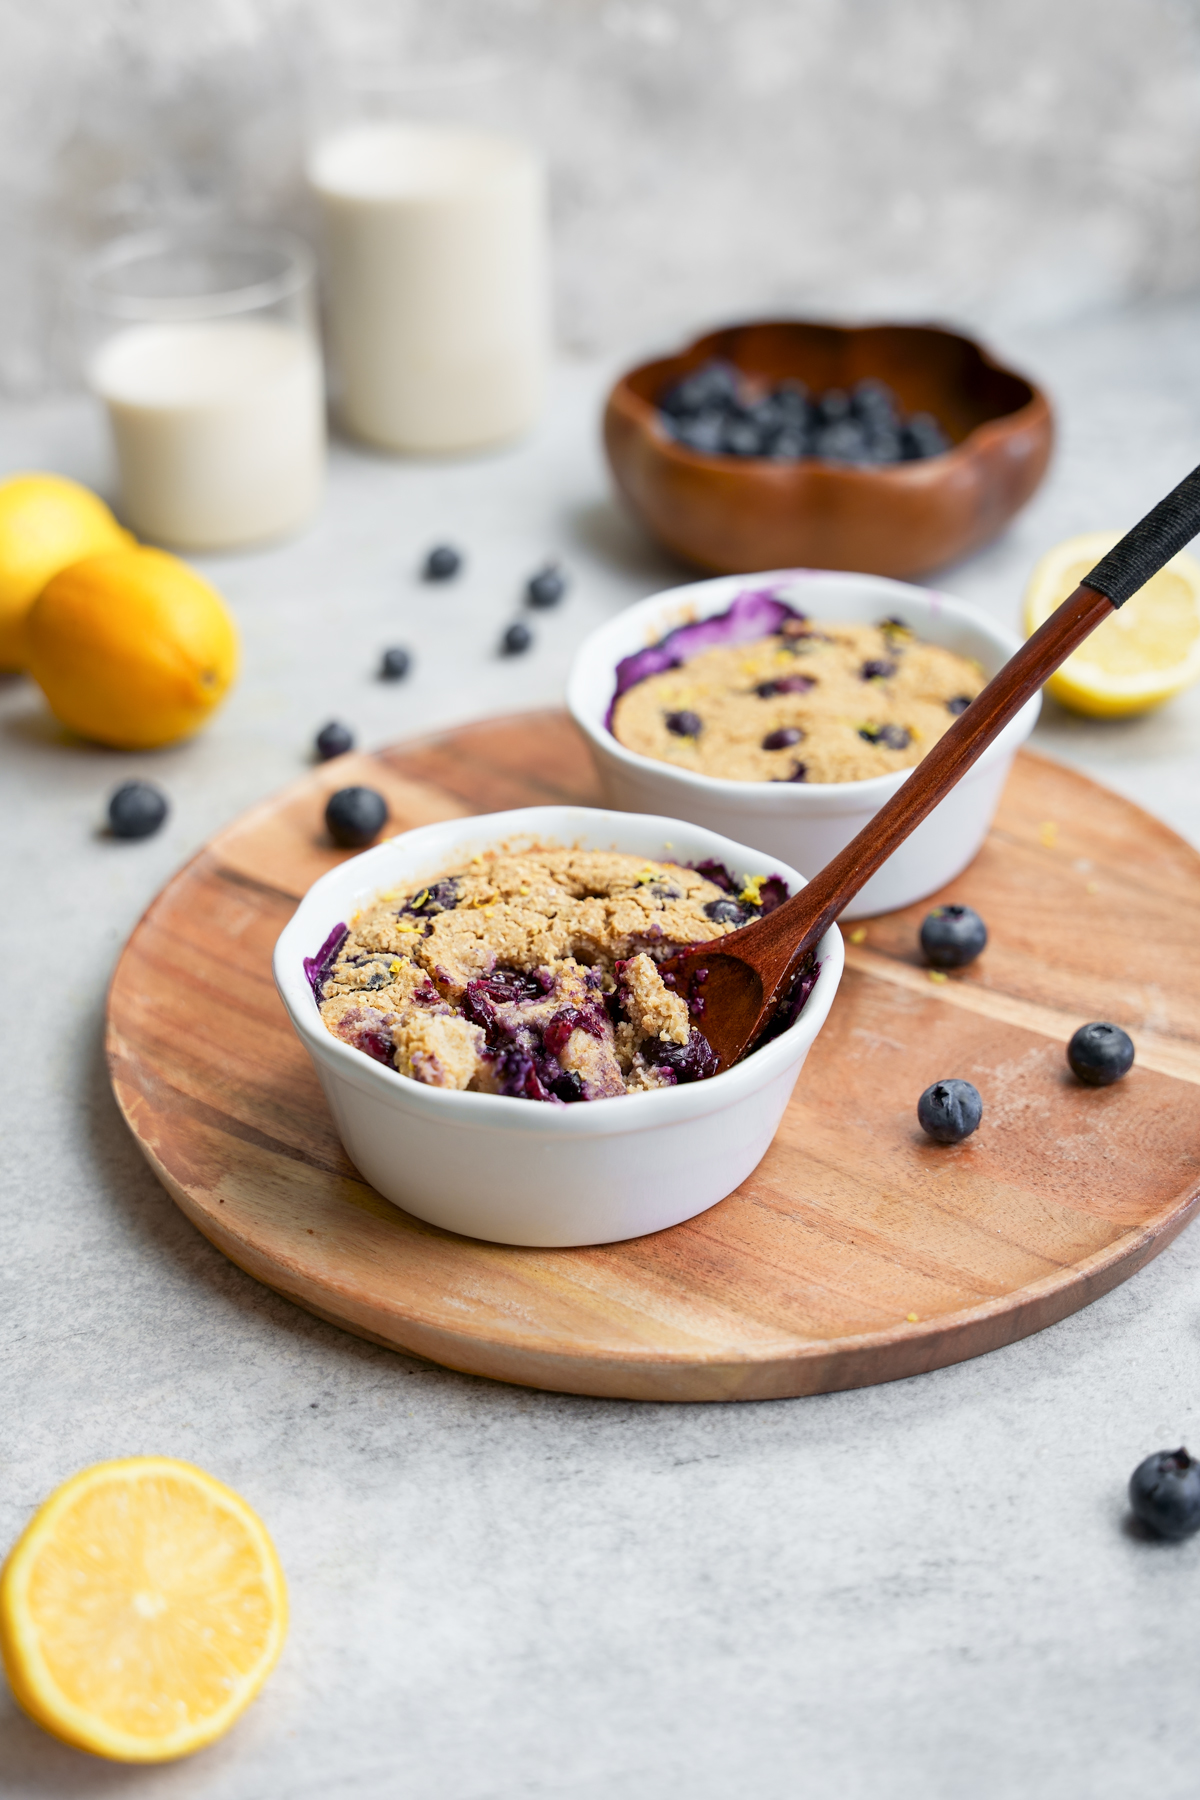 the lemon blueberry baked oatmeal with a bite taken out to show the fluffy cake like texture